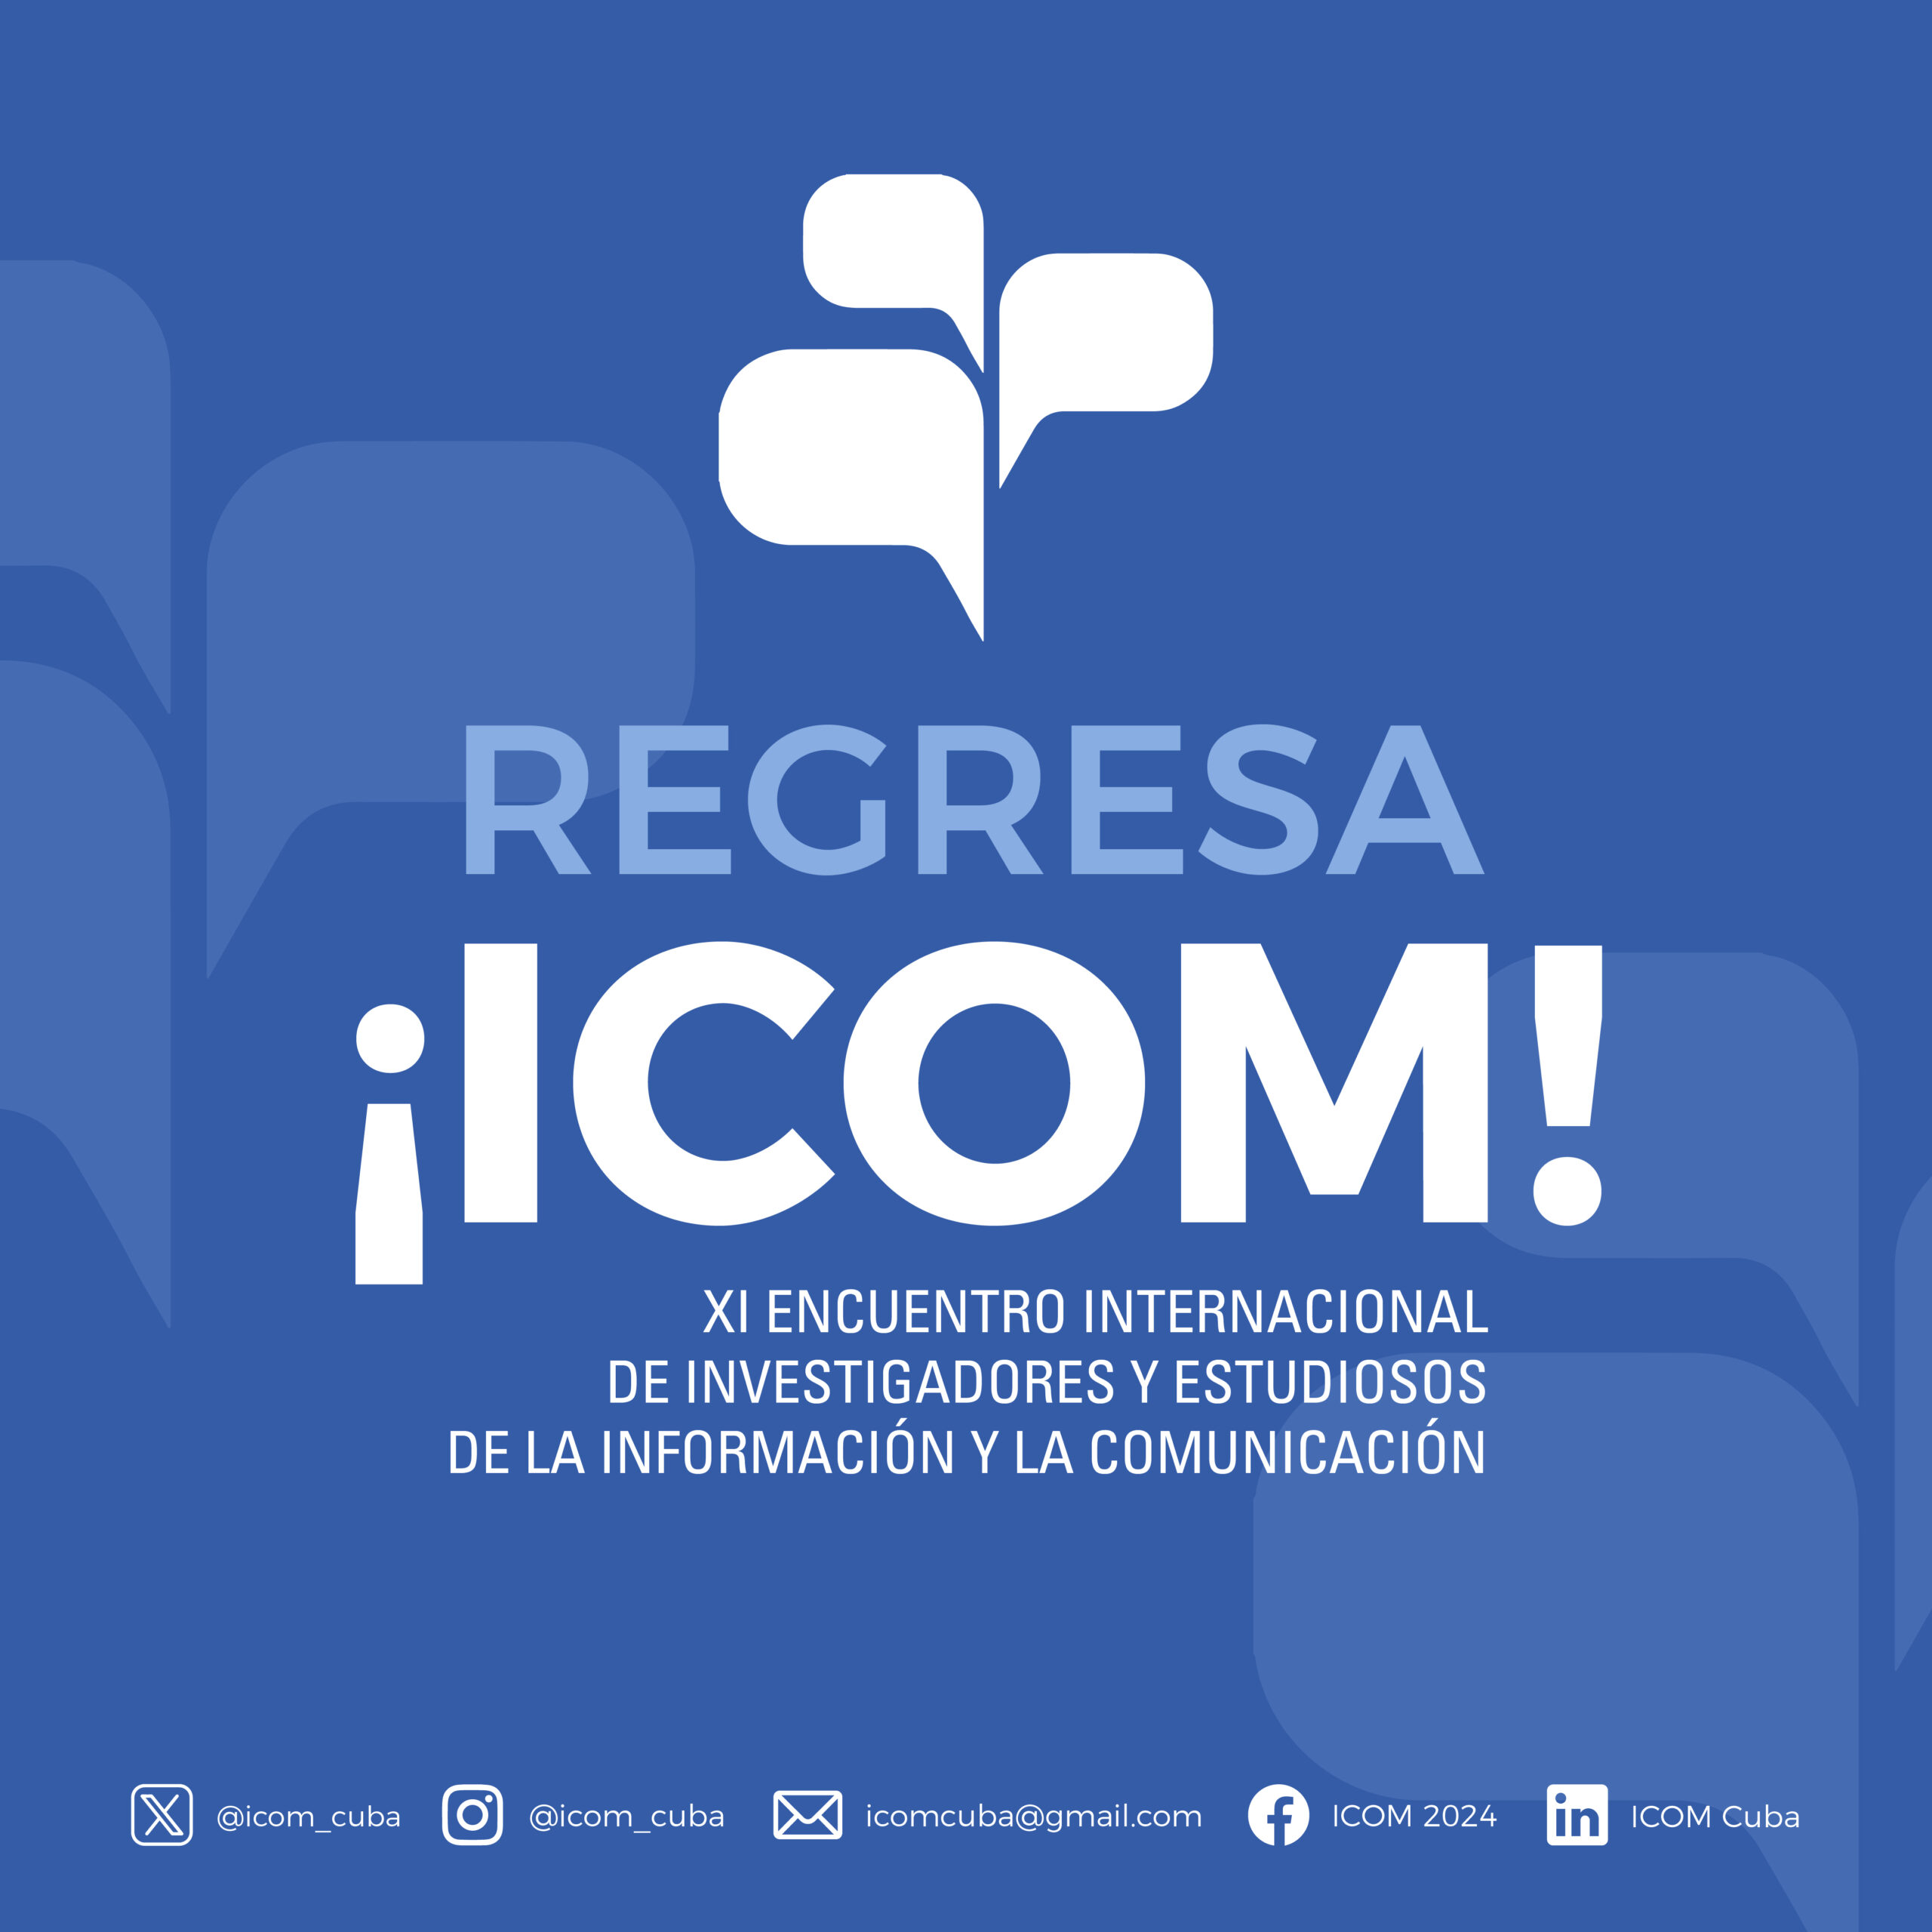 International information and communication event prepared in Cuba 